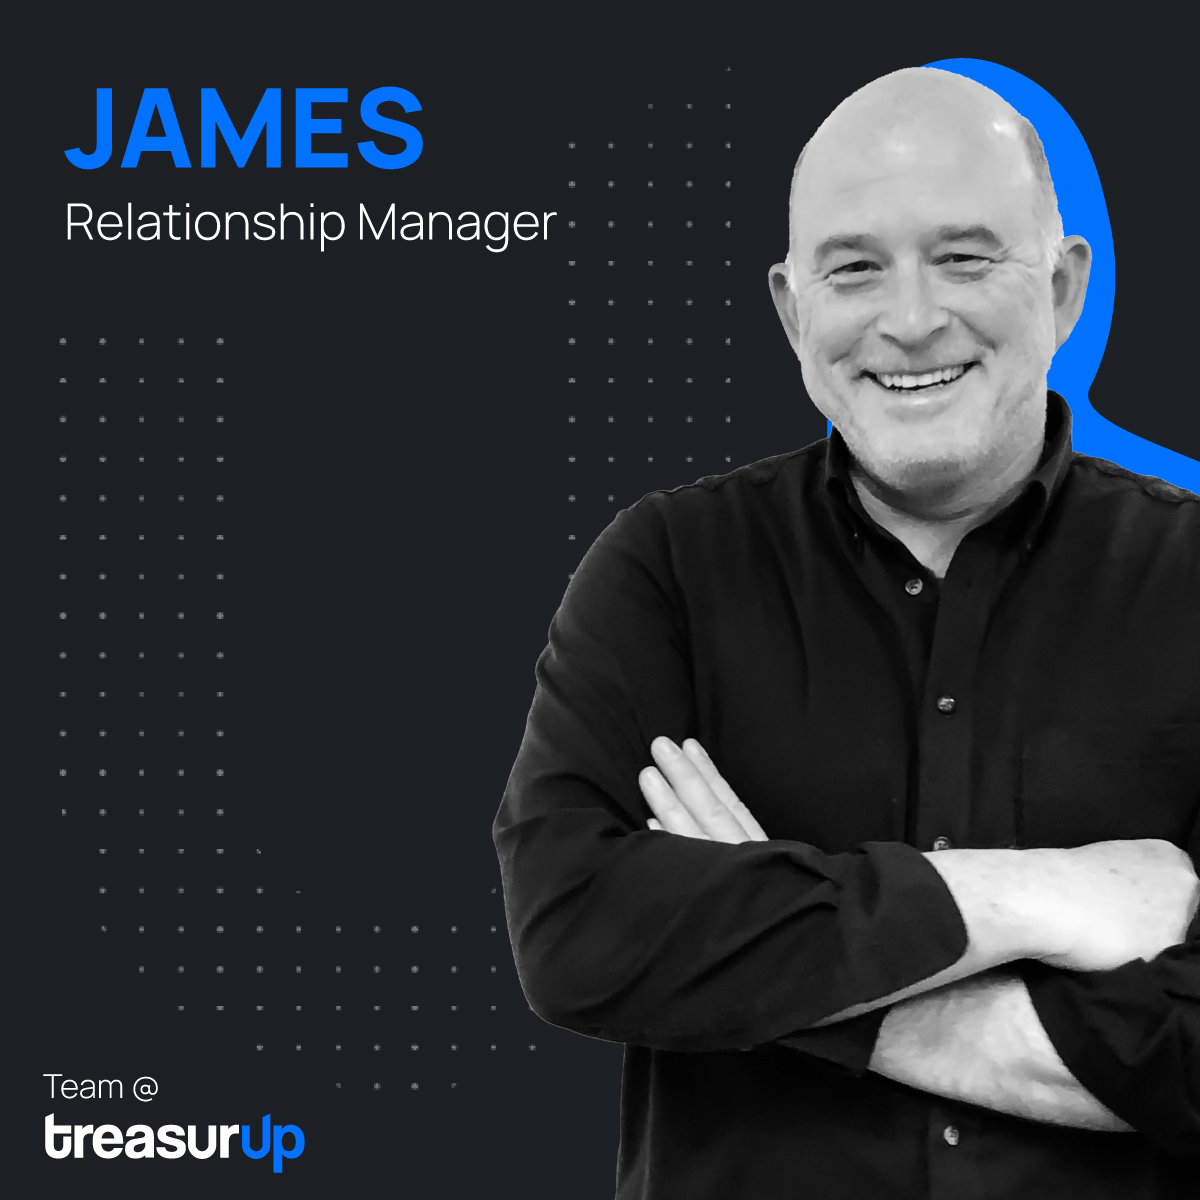 A photo of James, the Relationship Manager for Asia-Pacific at TreasurUp, featured on the website. This image is related to James' role in developing and maintaining business relationships with clients in the Asia-Pacific region.